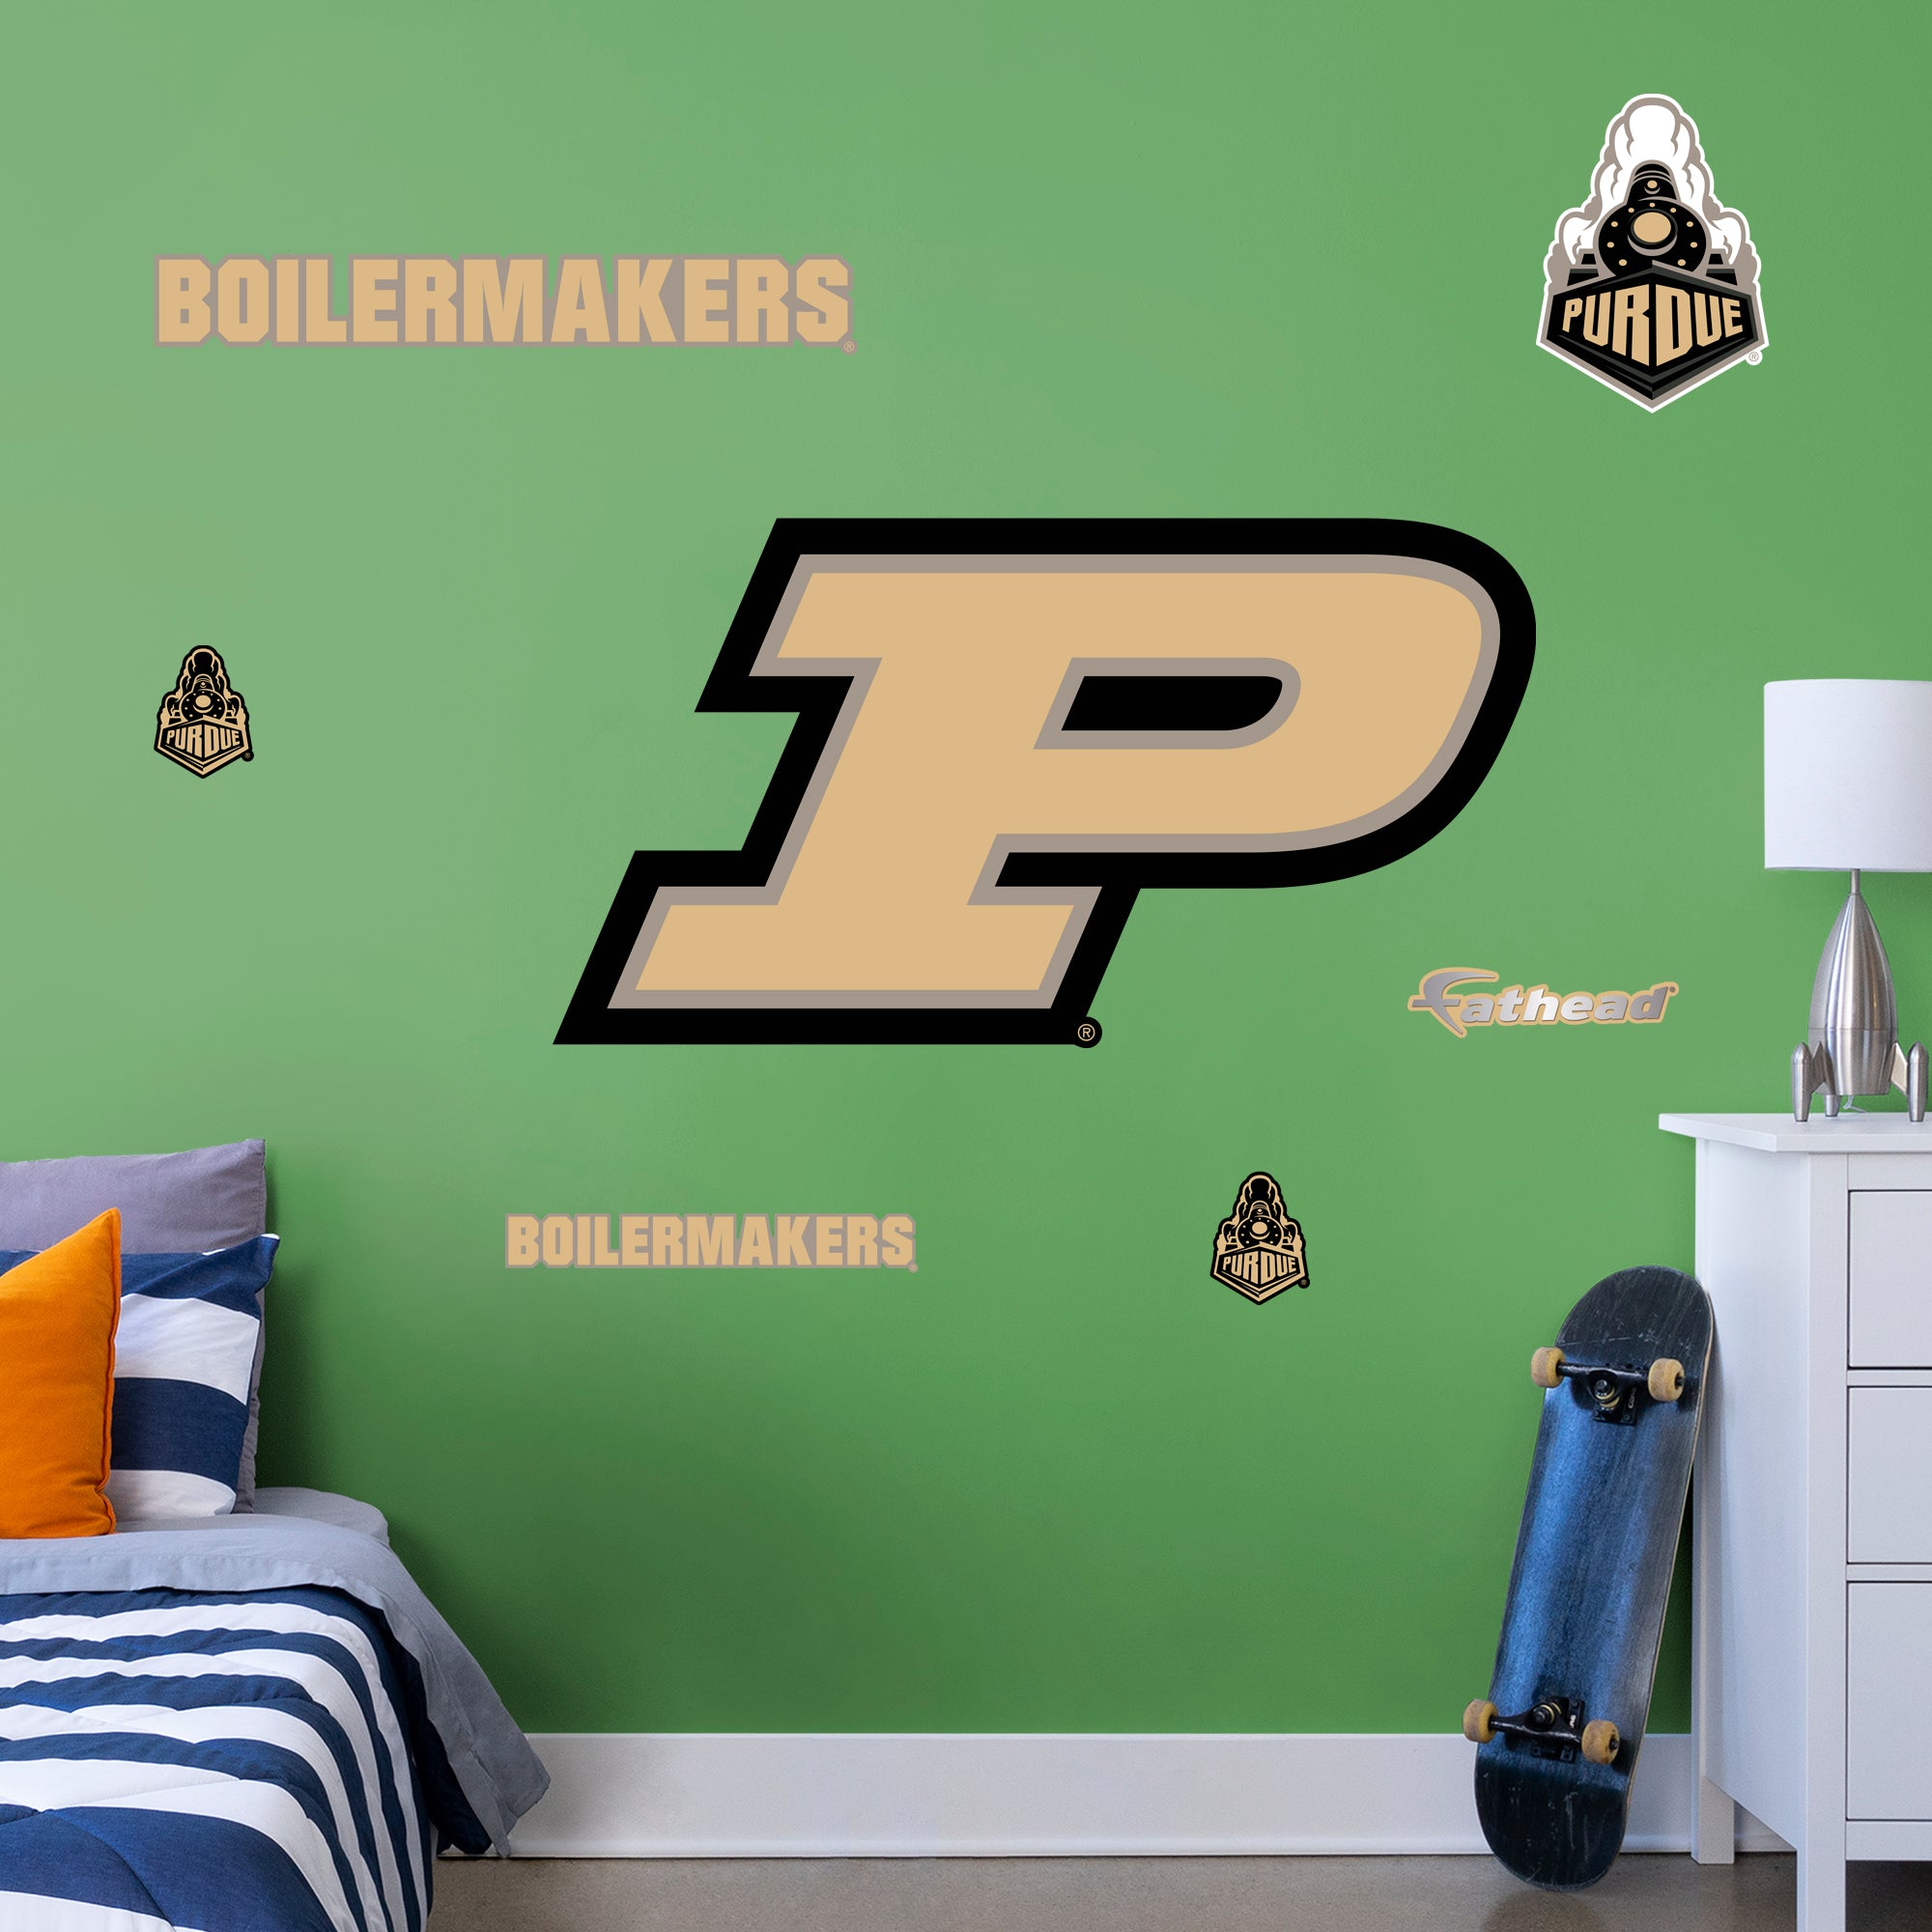 Purdue Boilermakers 2020 P RealBig Logo - Officially Licensed NCAA Removable Wall Decal Giant Logo + 7 Decals (51"W x 27"H) by F